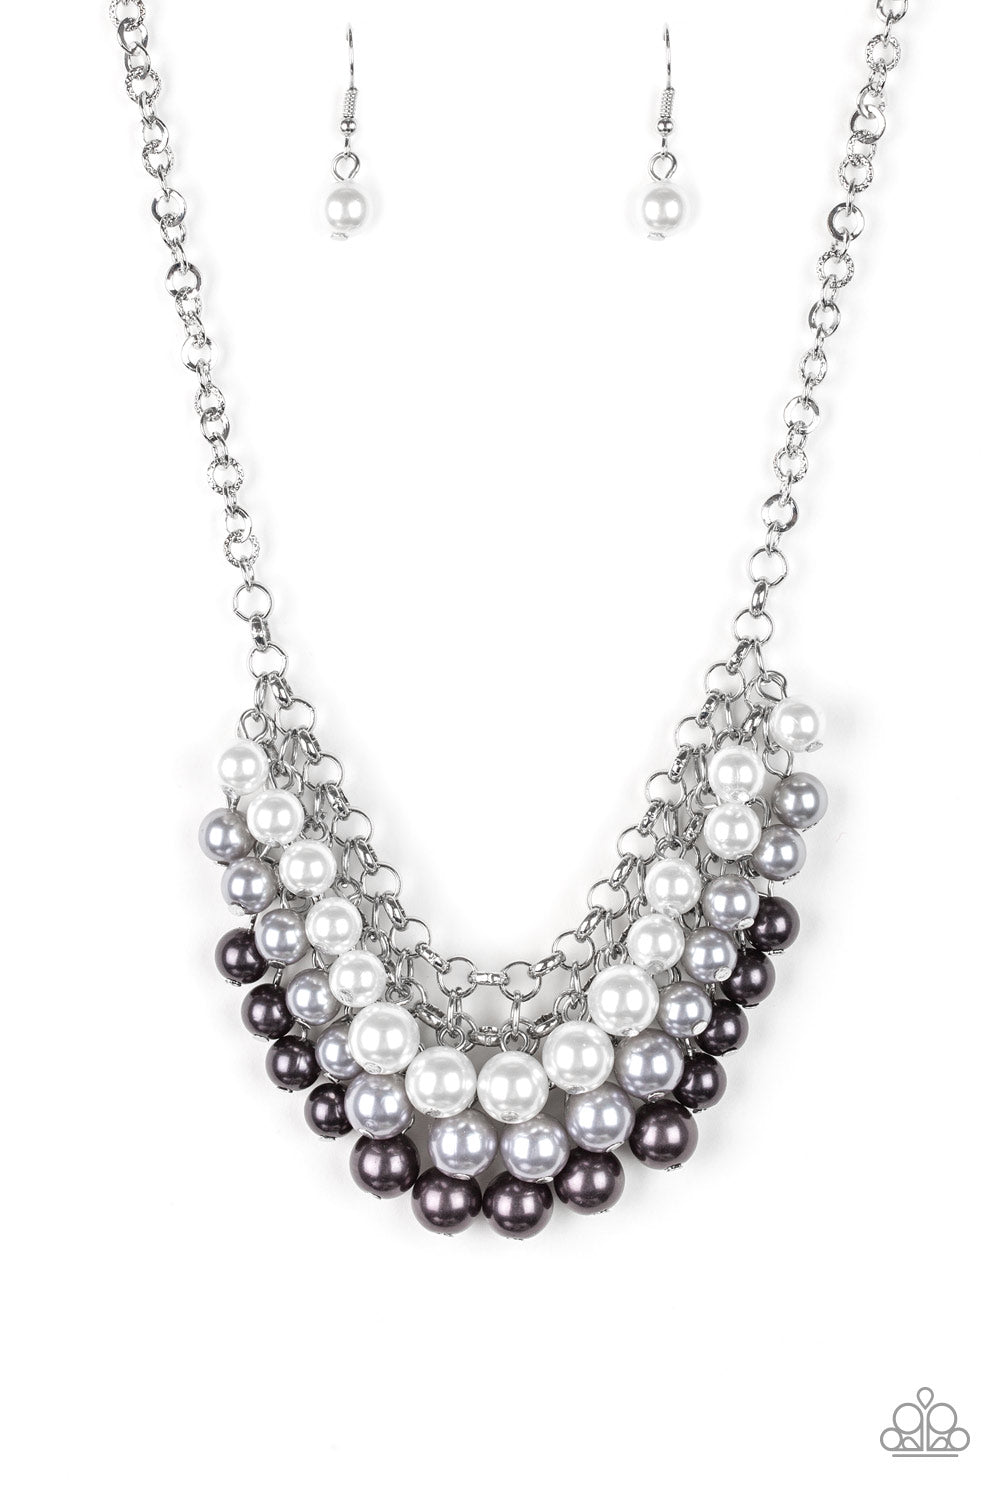 Run For The HEELS - Multi White Silver Black Pearl Fringe Necklace - Paparazzi Accessories